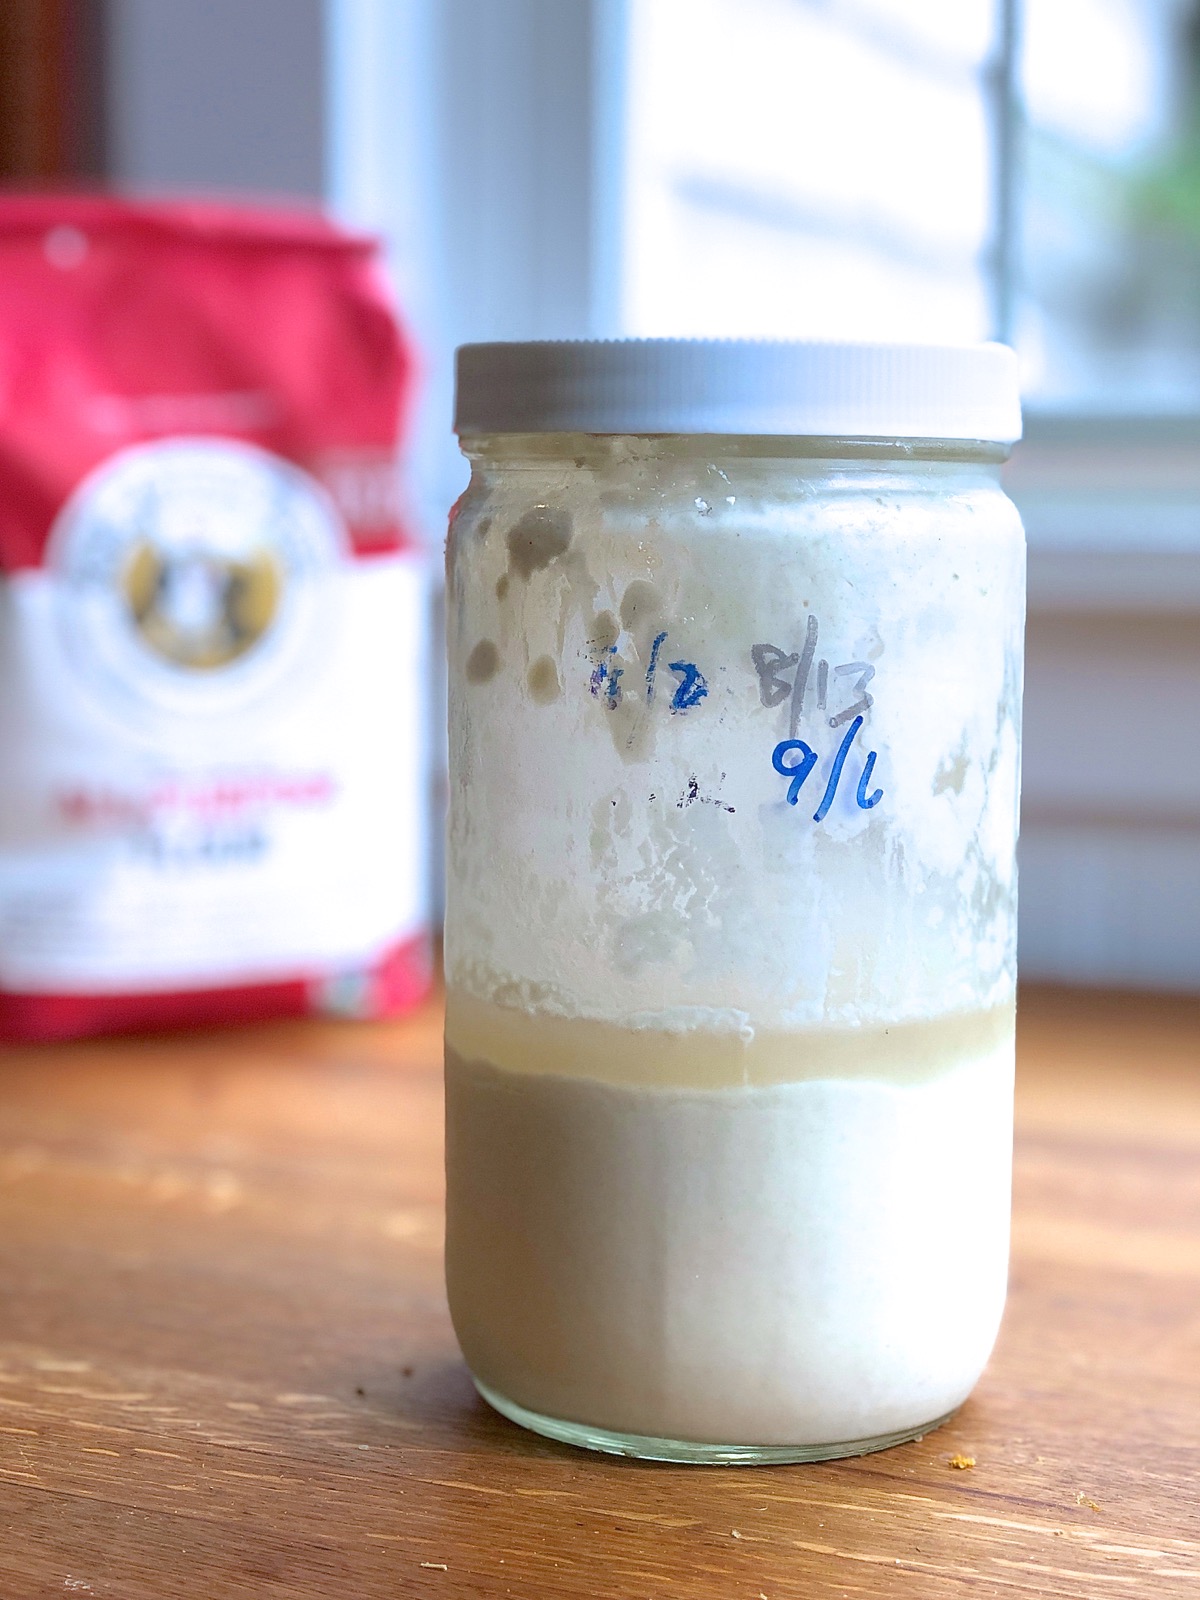 Sourdough starter in a jar, waiting to be fed.